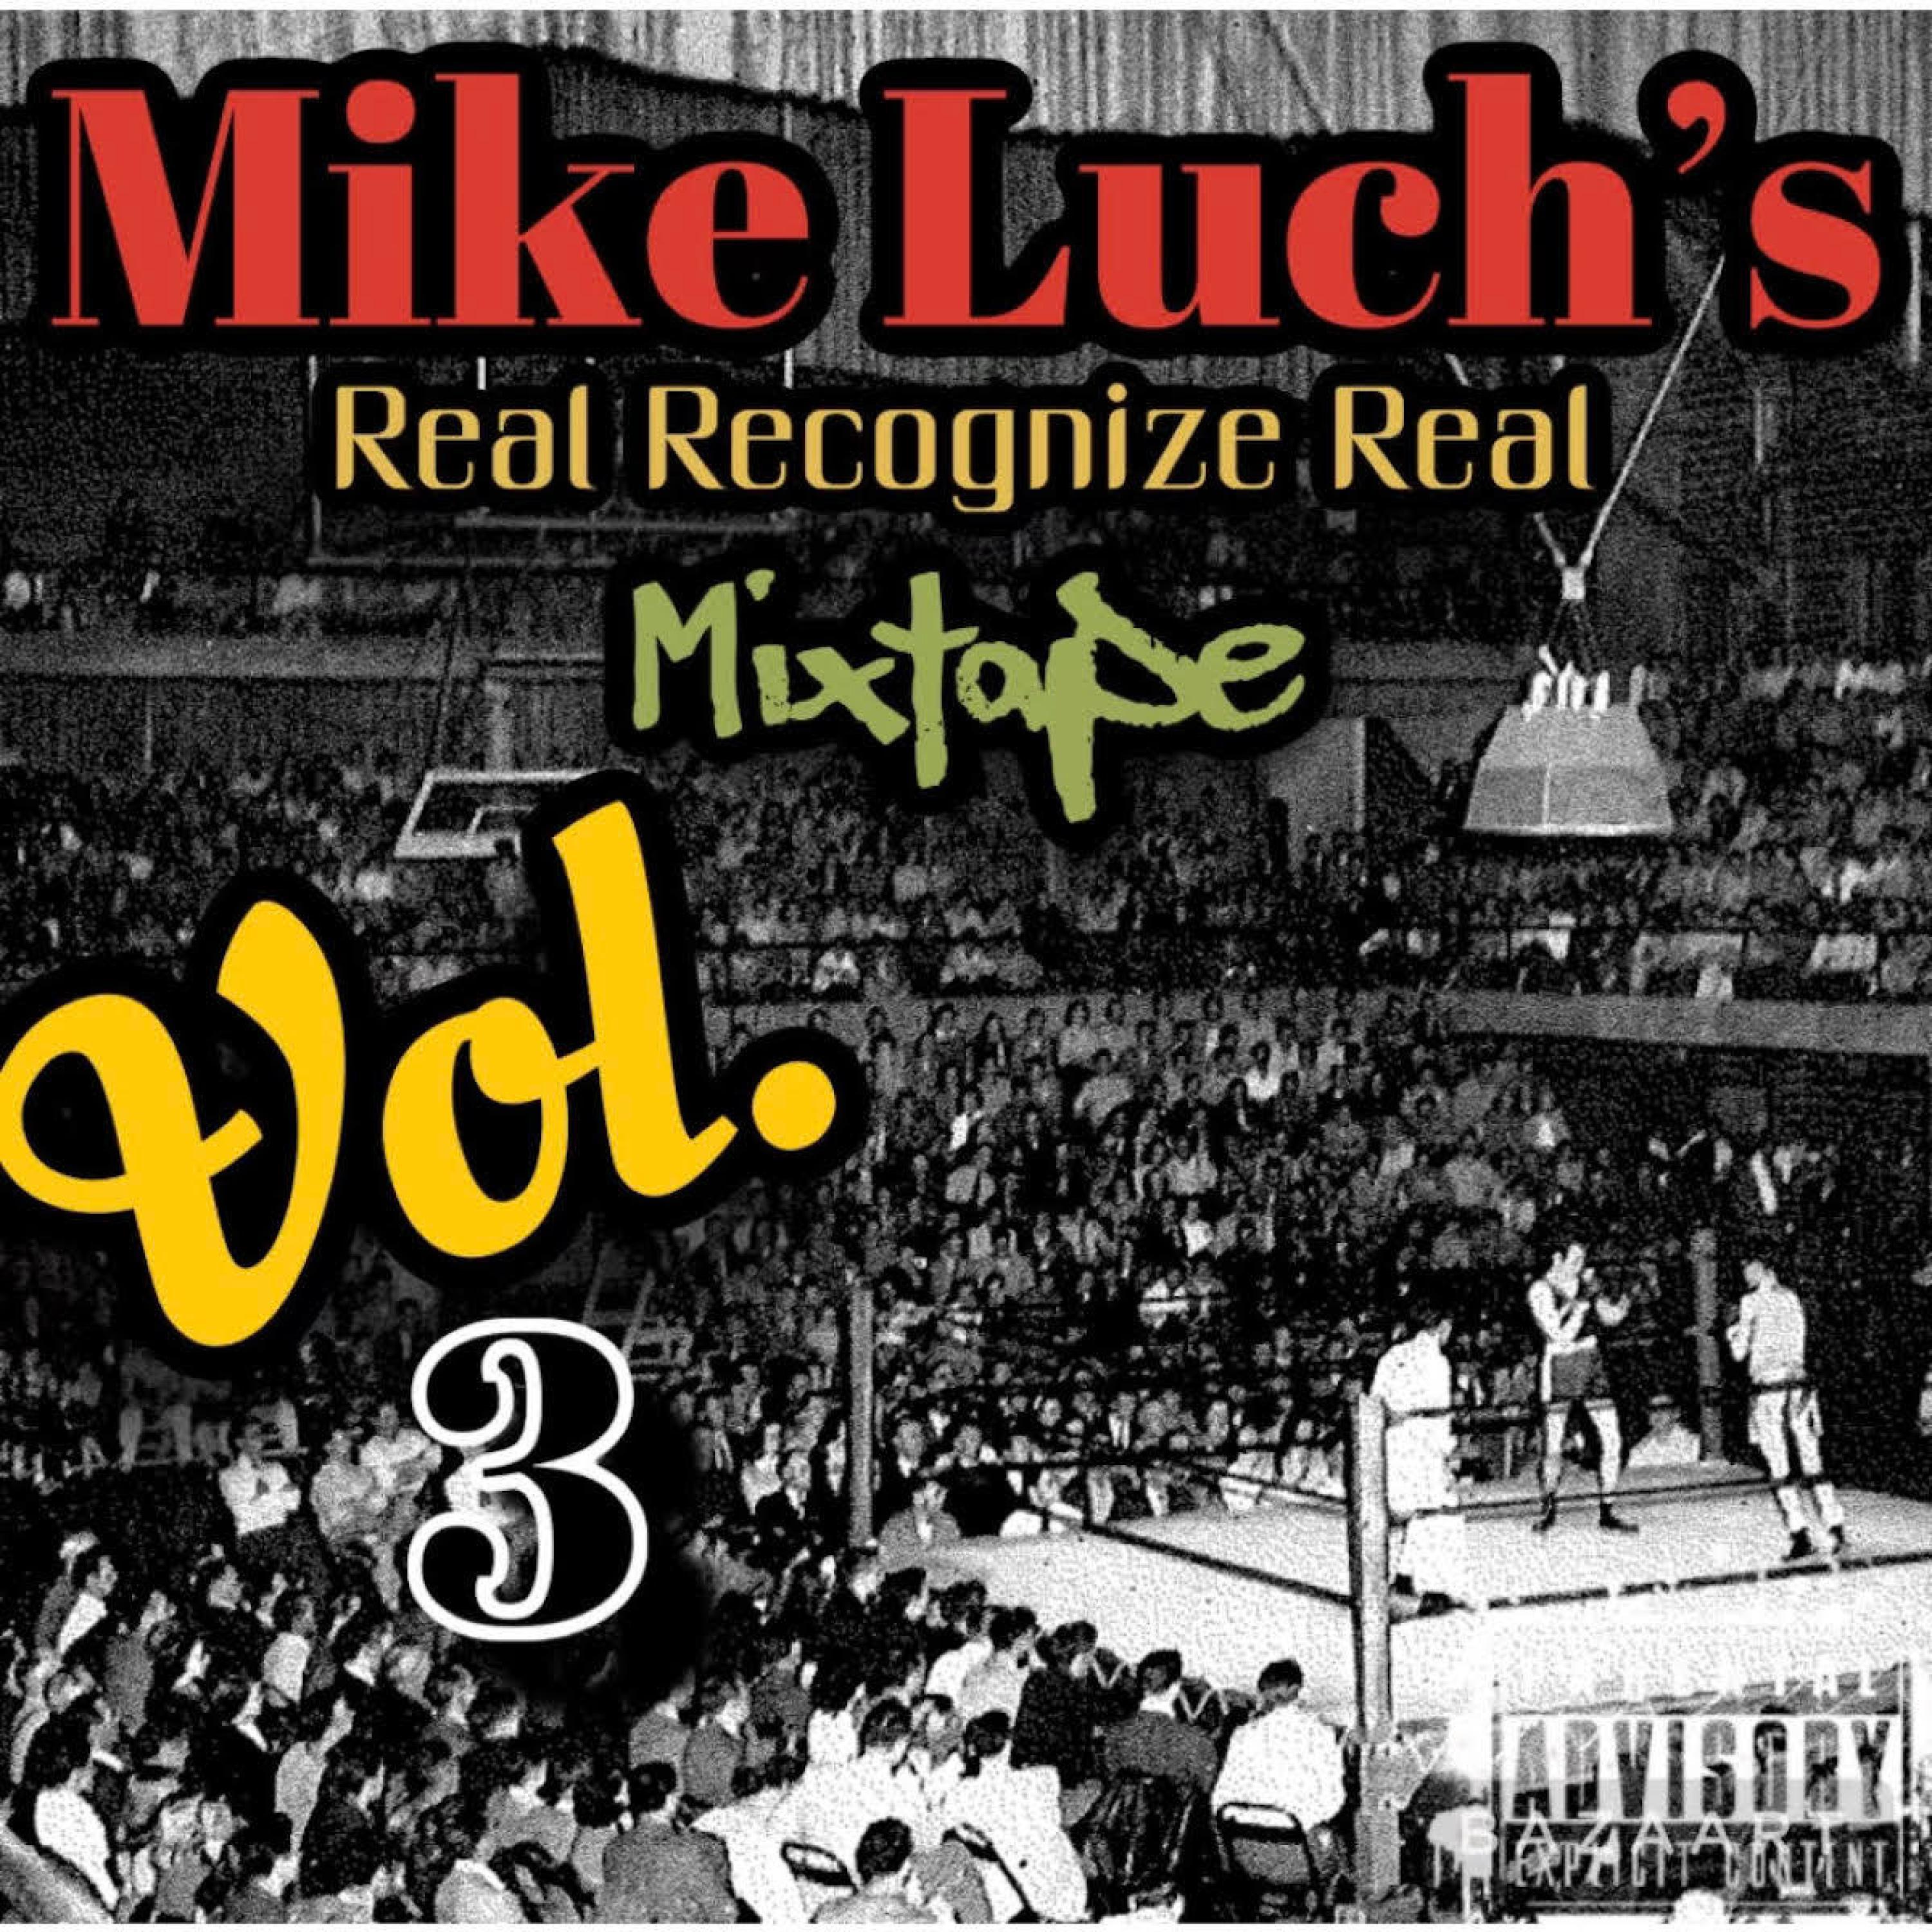 Mike Luch - Week 37